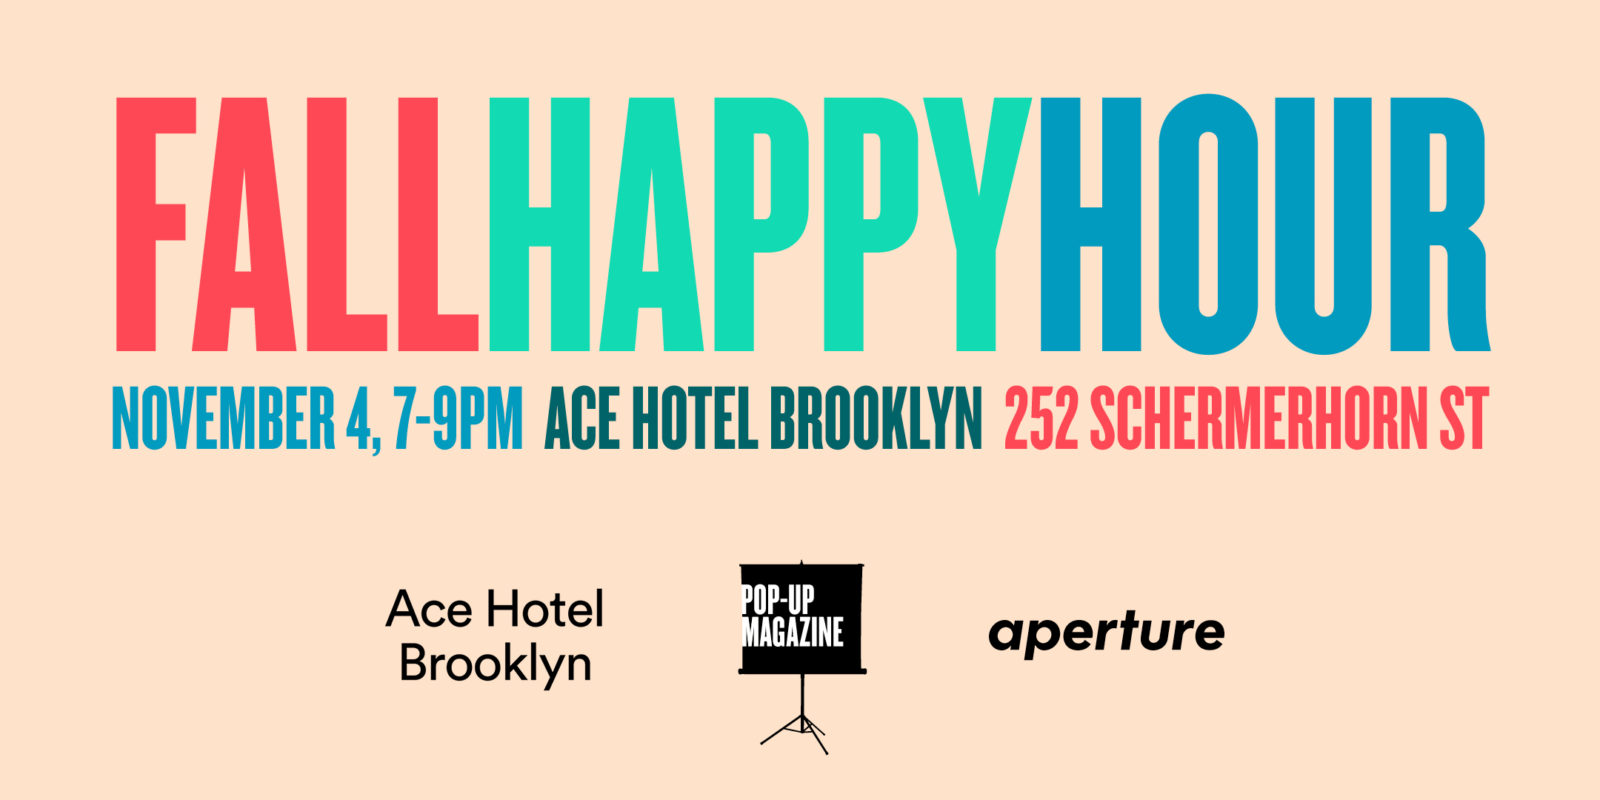 Fall Happy Hour event flyer